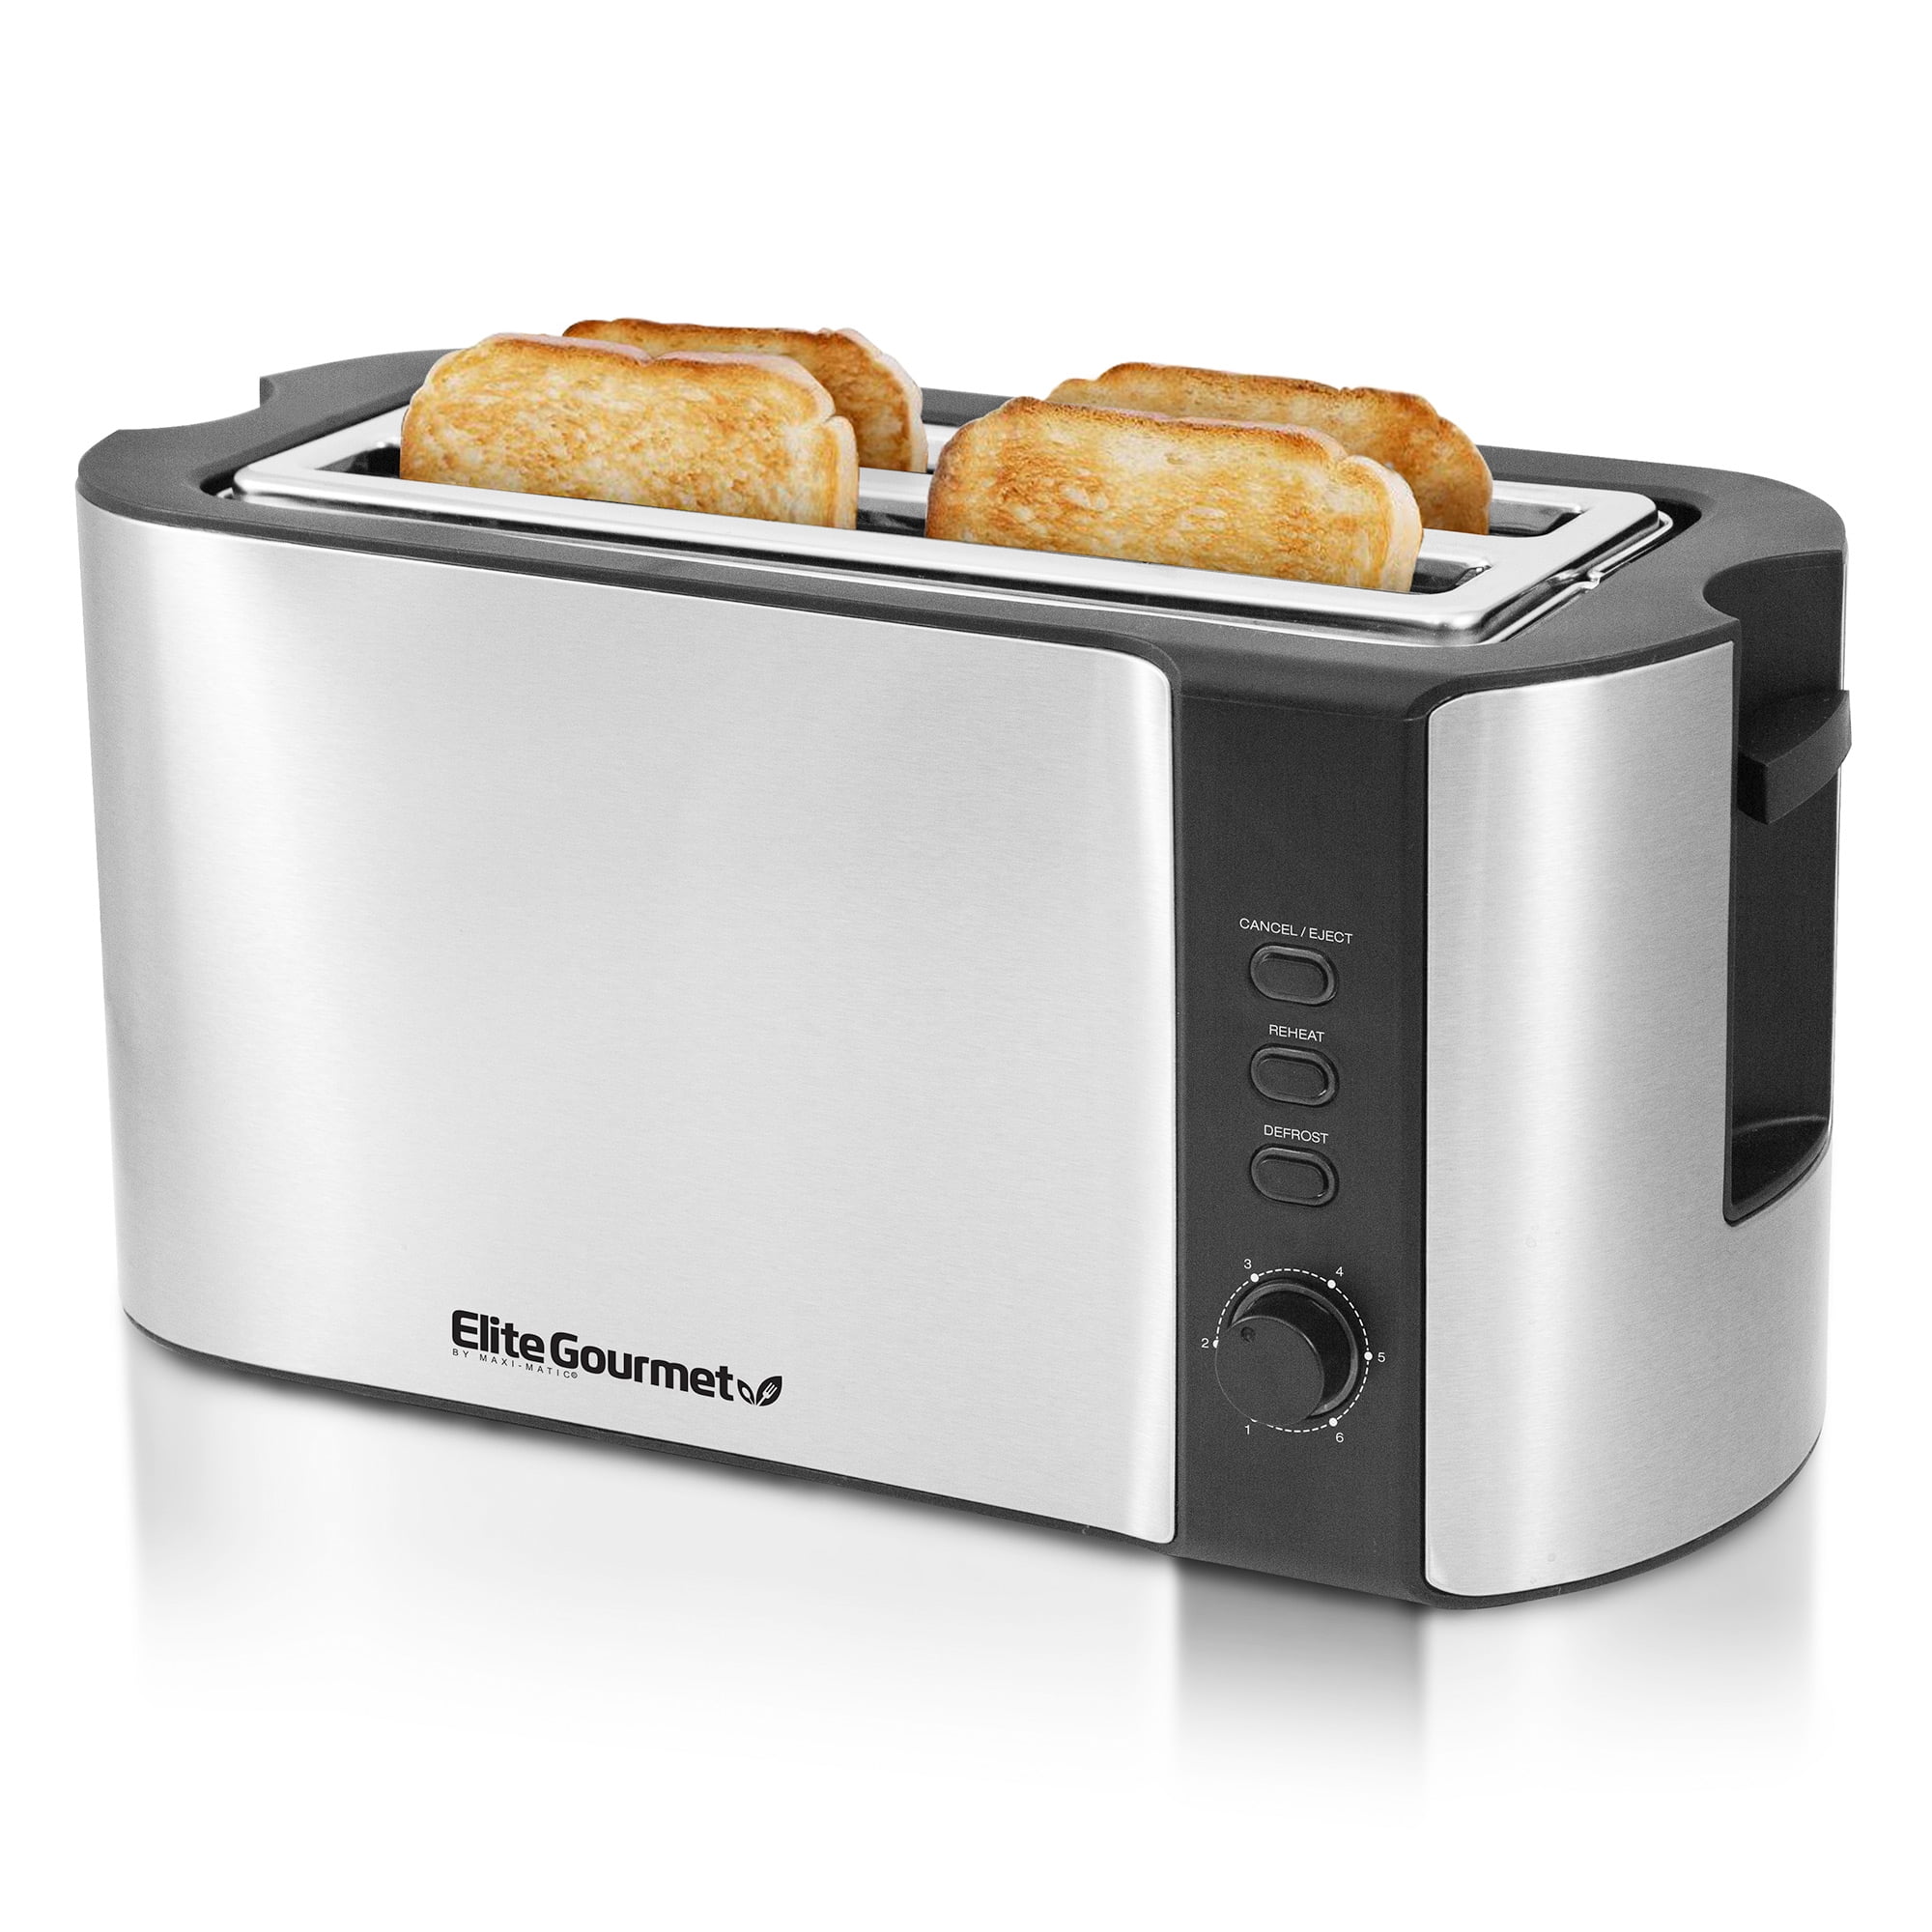 4 Slice 1300 Watts Silver & Black Specialty Breads Reheat Cancel & Defrost Settings Bagels Maxi-Matic ECT-3100 Stainless Steel Long Slot Toaster